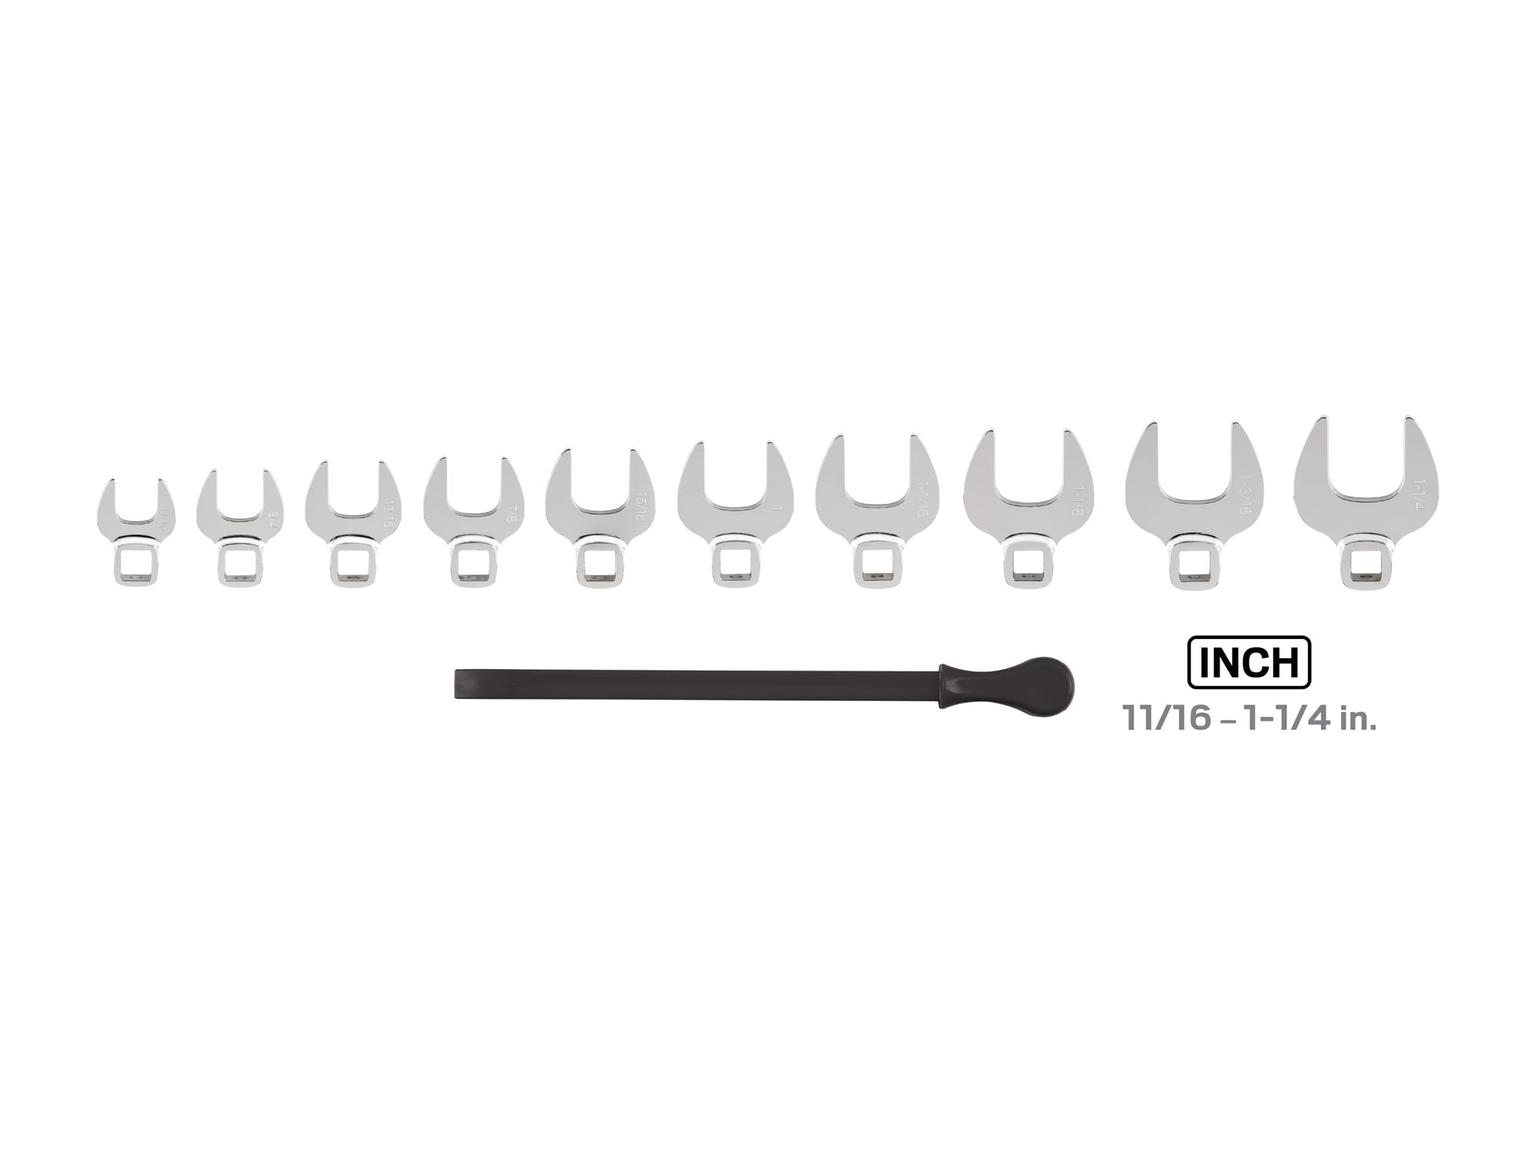 TEKTON WCF91401-T 1/2 Inch Drive Crowfoot Wrench Set with Key, 10-Piece (11/16 - 1-1/4 in.)